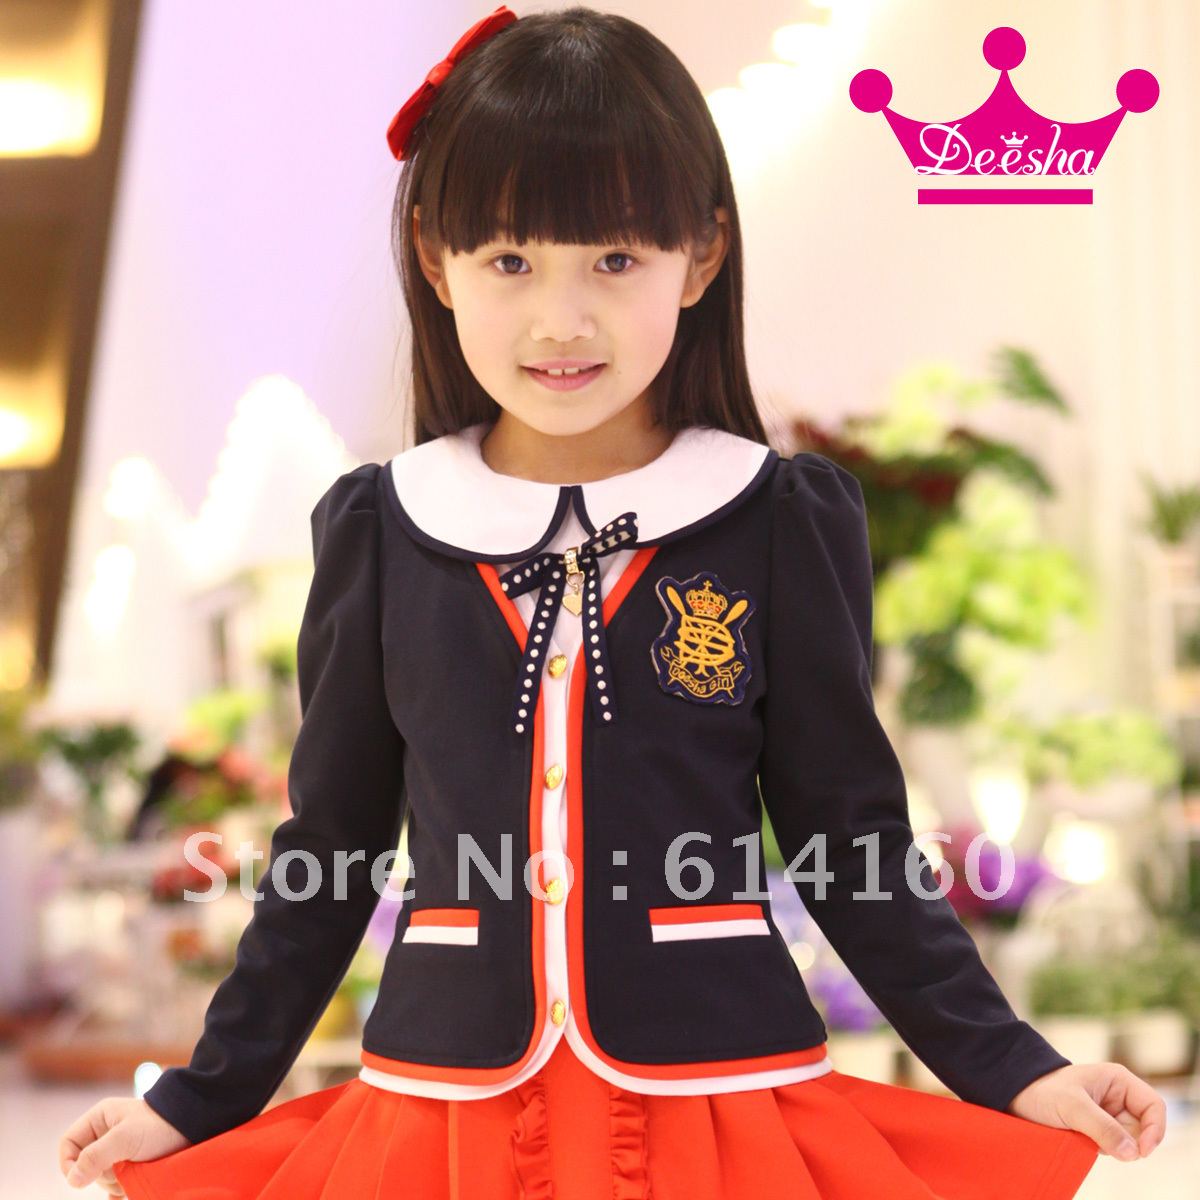 DEESHA 2012 spring and autumn female clothing fashion preppy style baby child outerwear 1122320